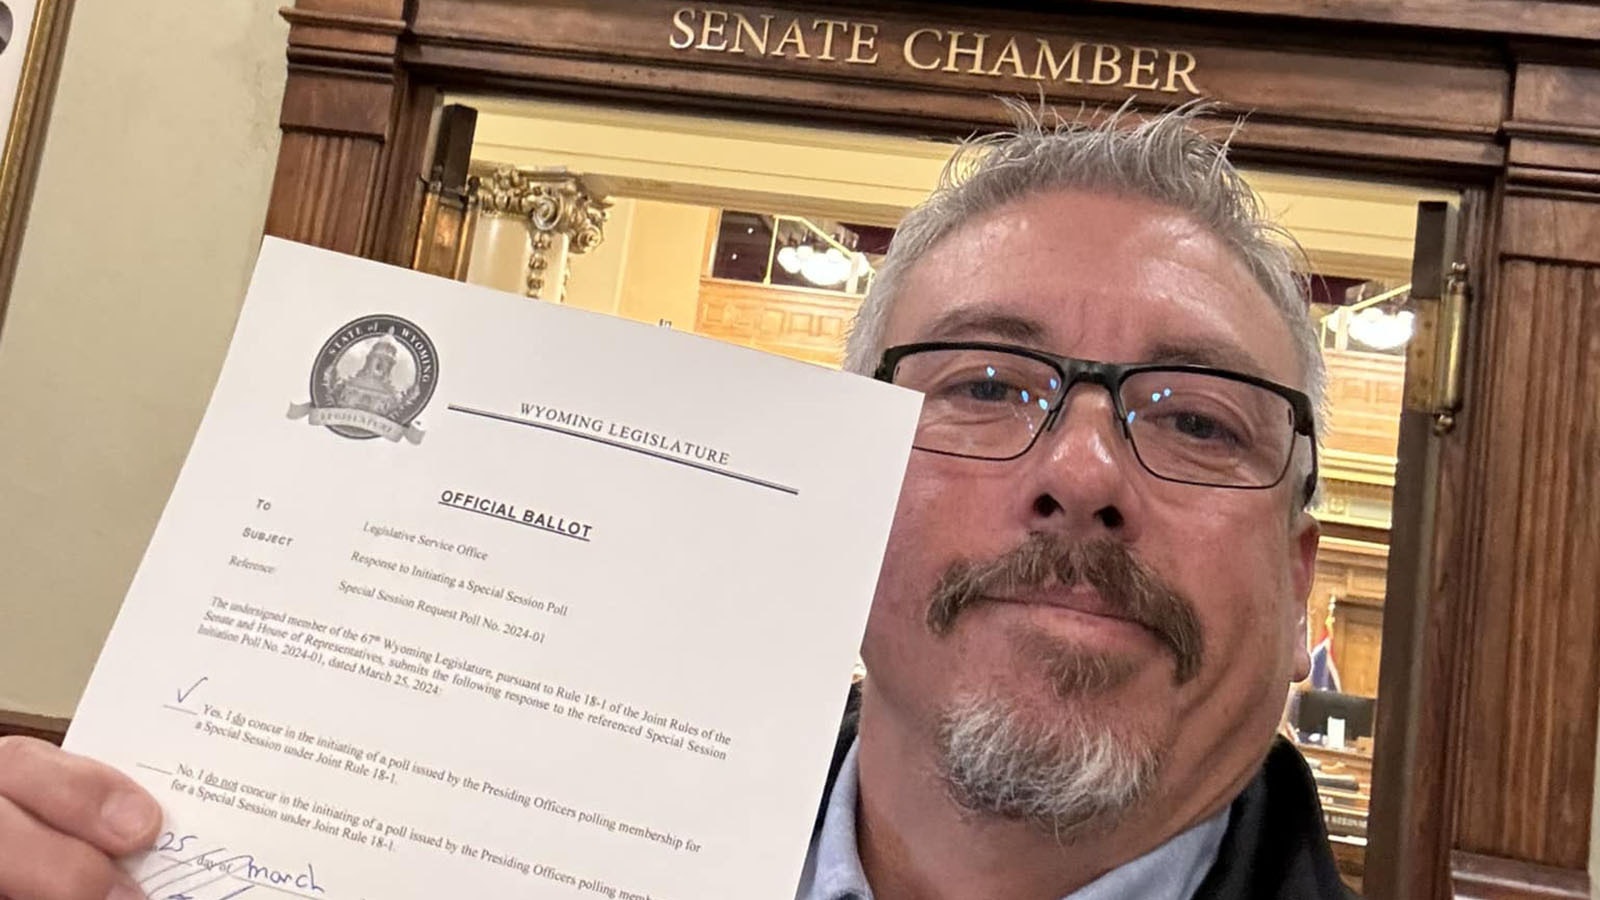 State Sen. Anthony Bouchard, R-Cheyenne, shows his ballot in favor of calling a special session of the Legislature.